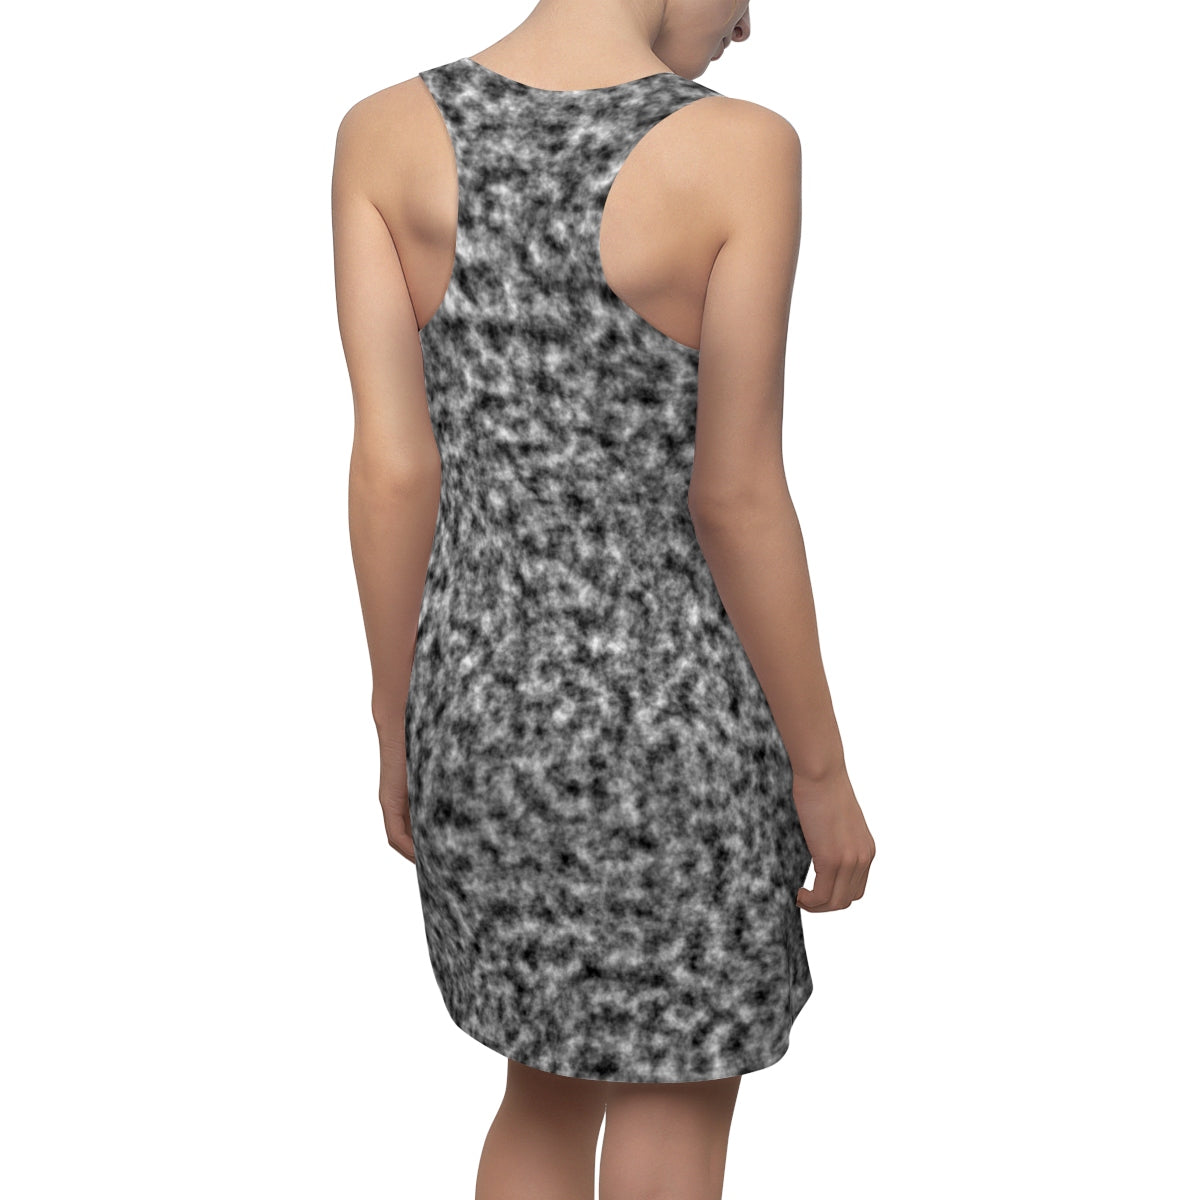 White and Black Clouds Racerback Dress